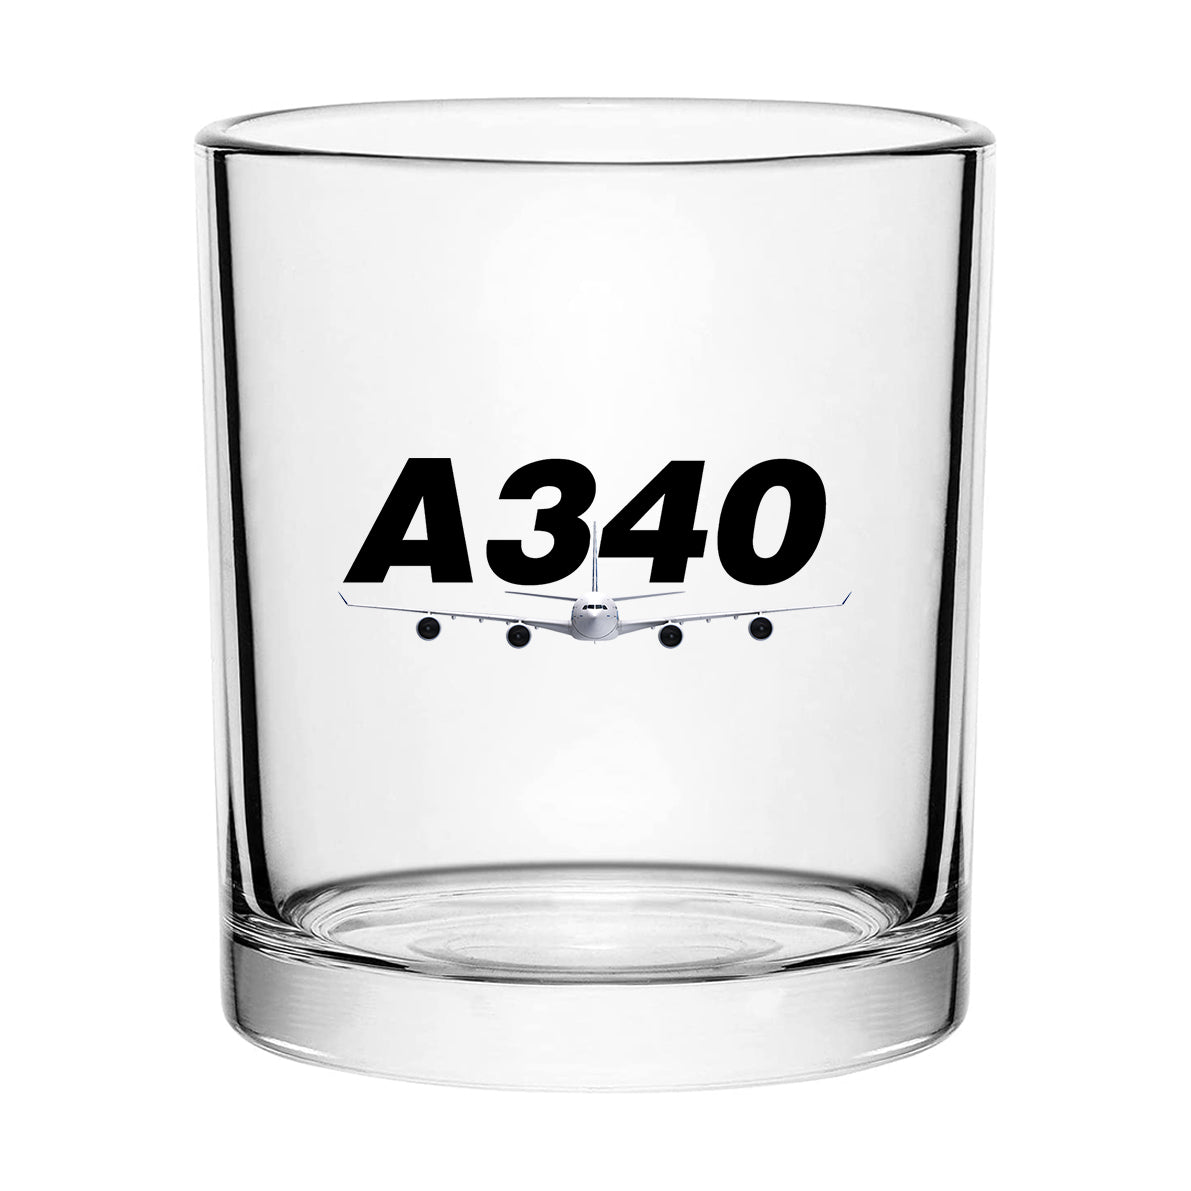 Super Airbus A340 Designed Special Whiskey Glasses